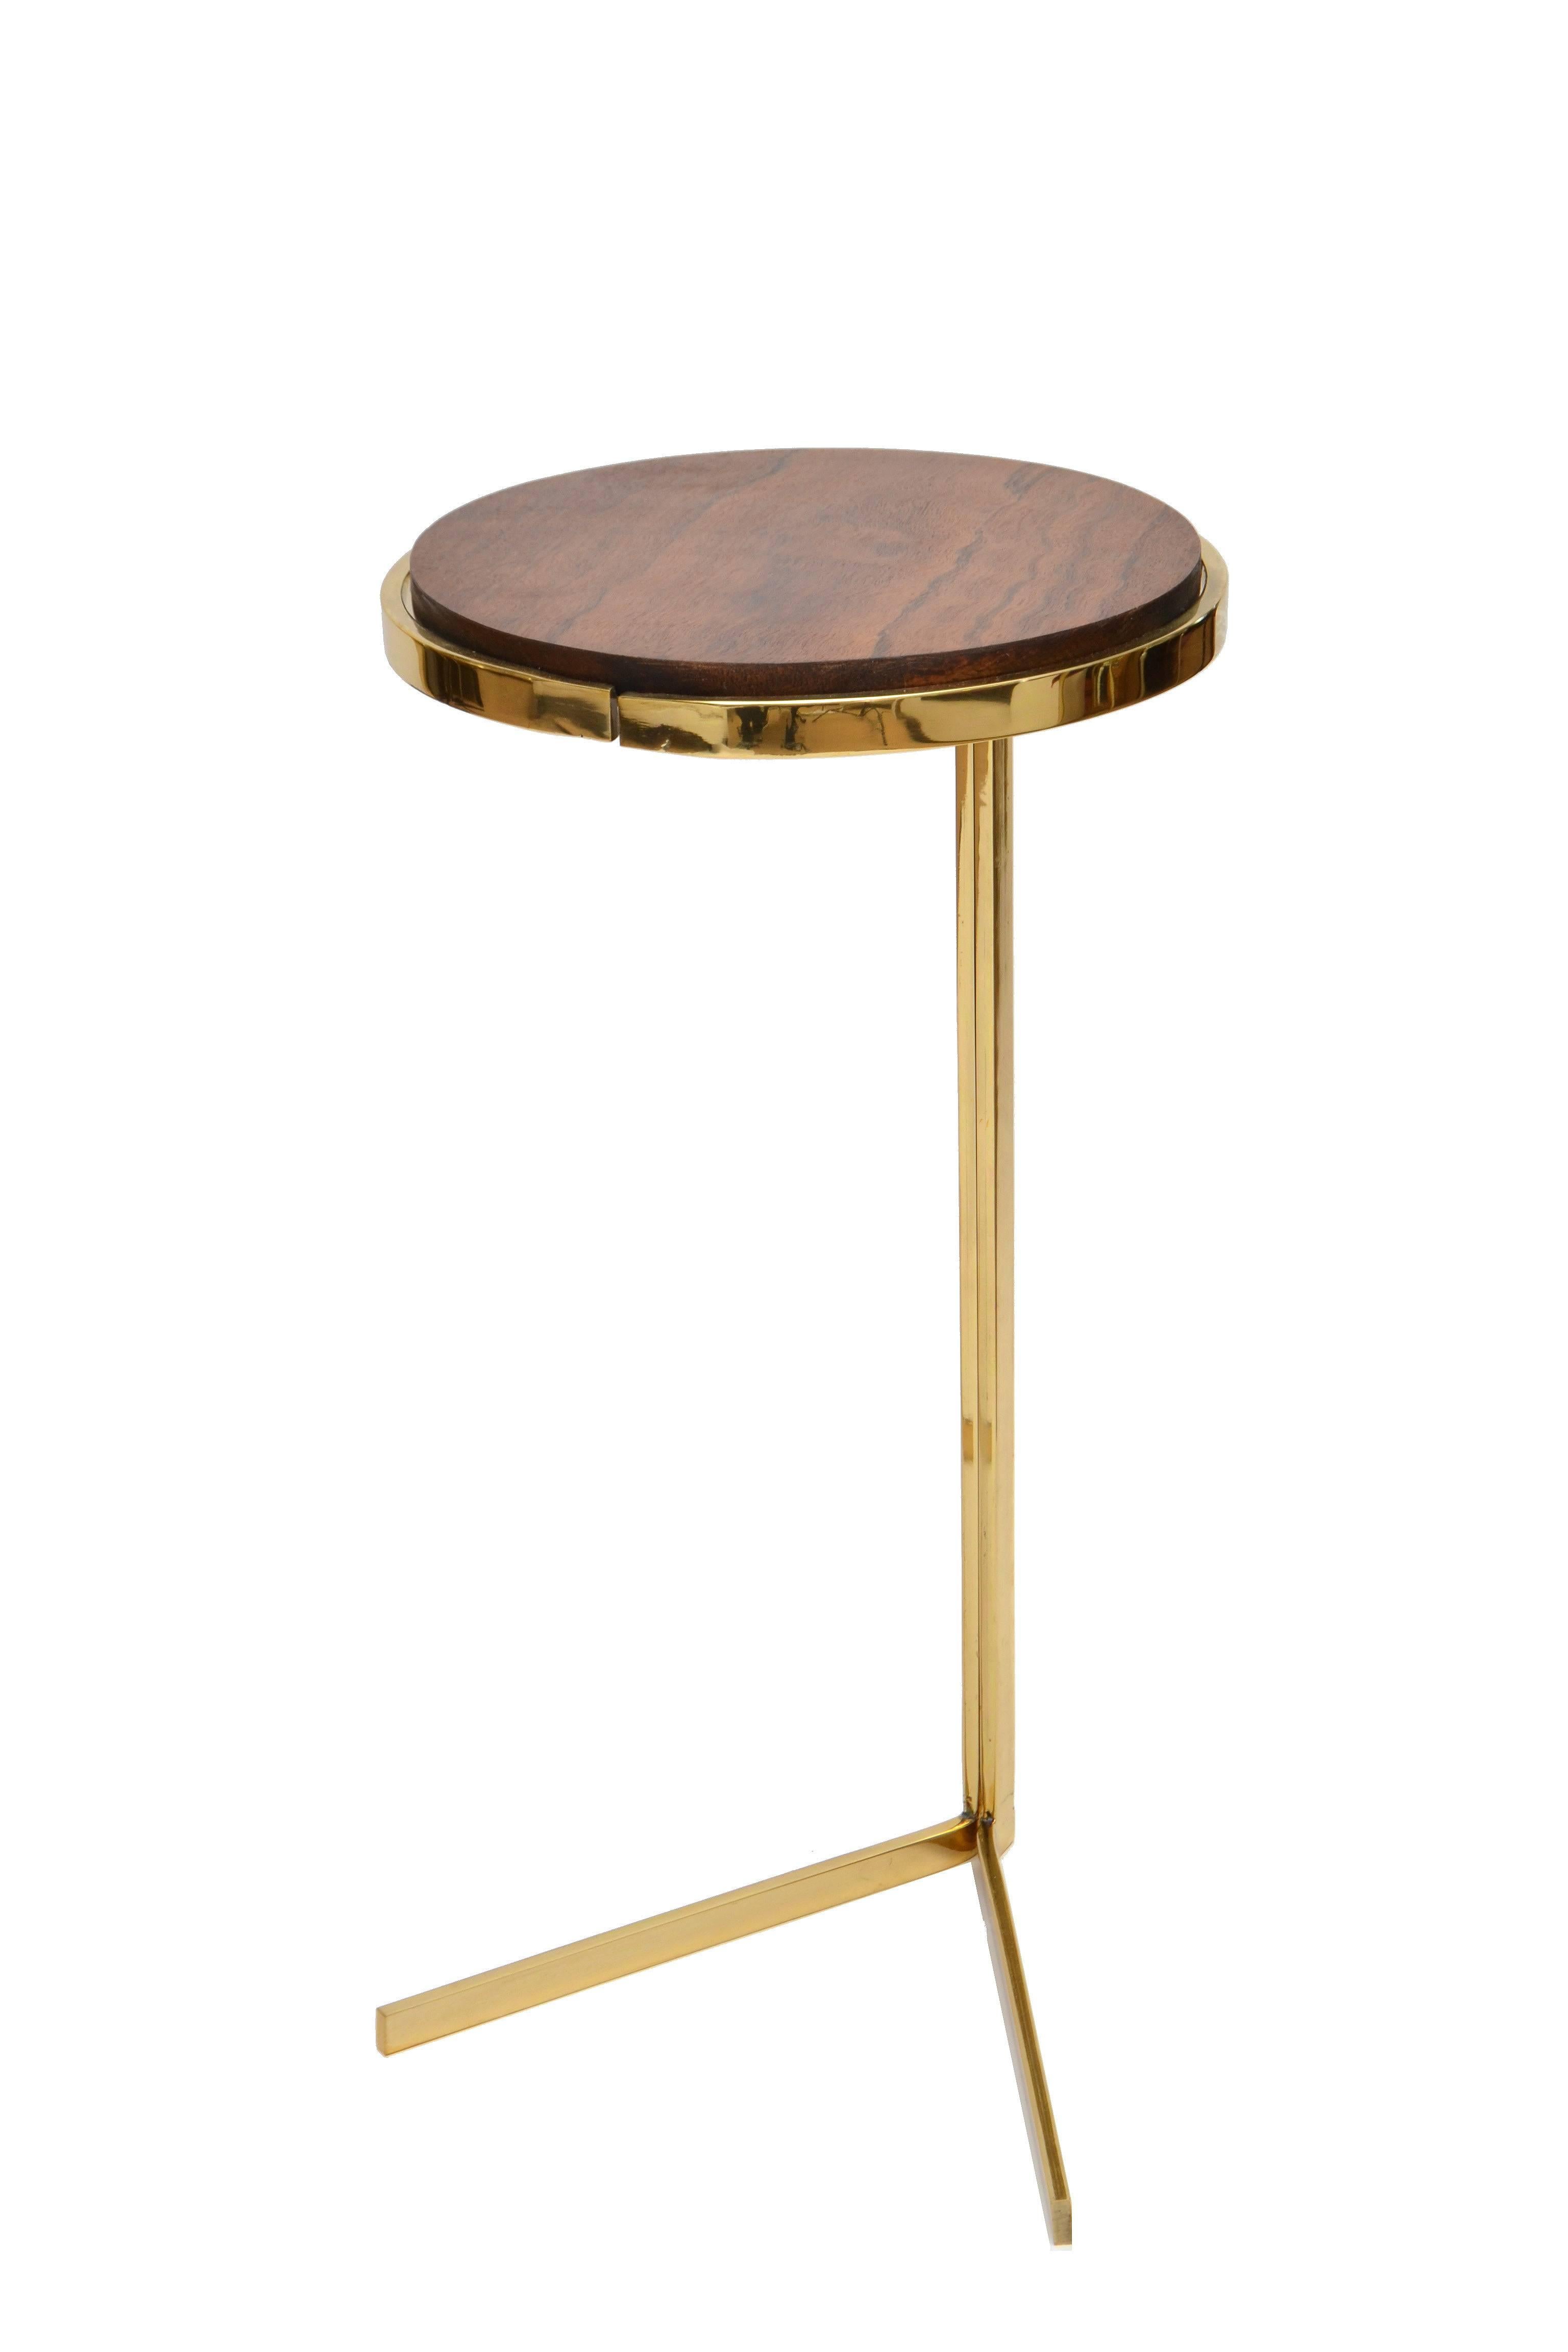 Art Deco Personal Brass with Wooden Top Side Tables 2